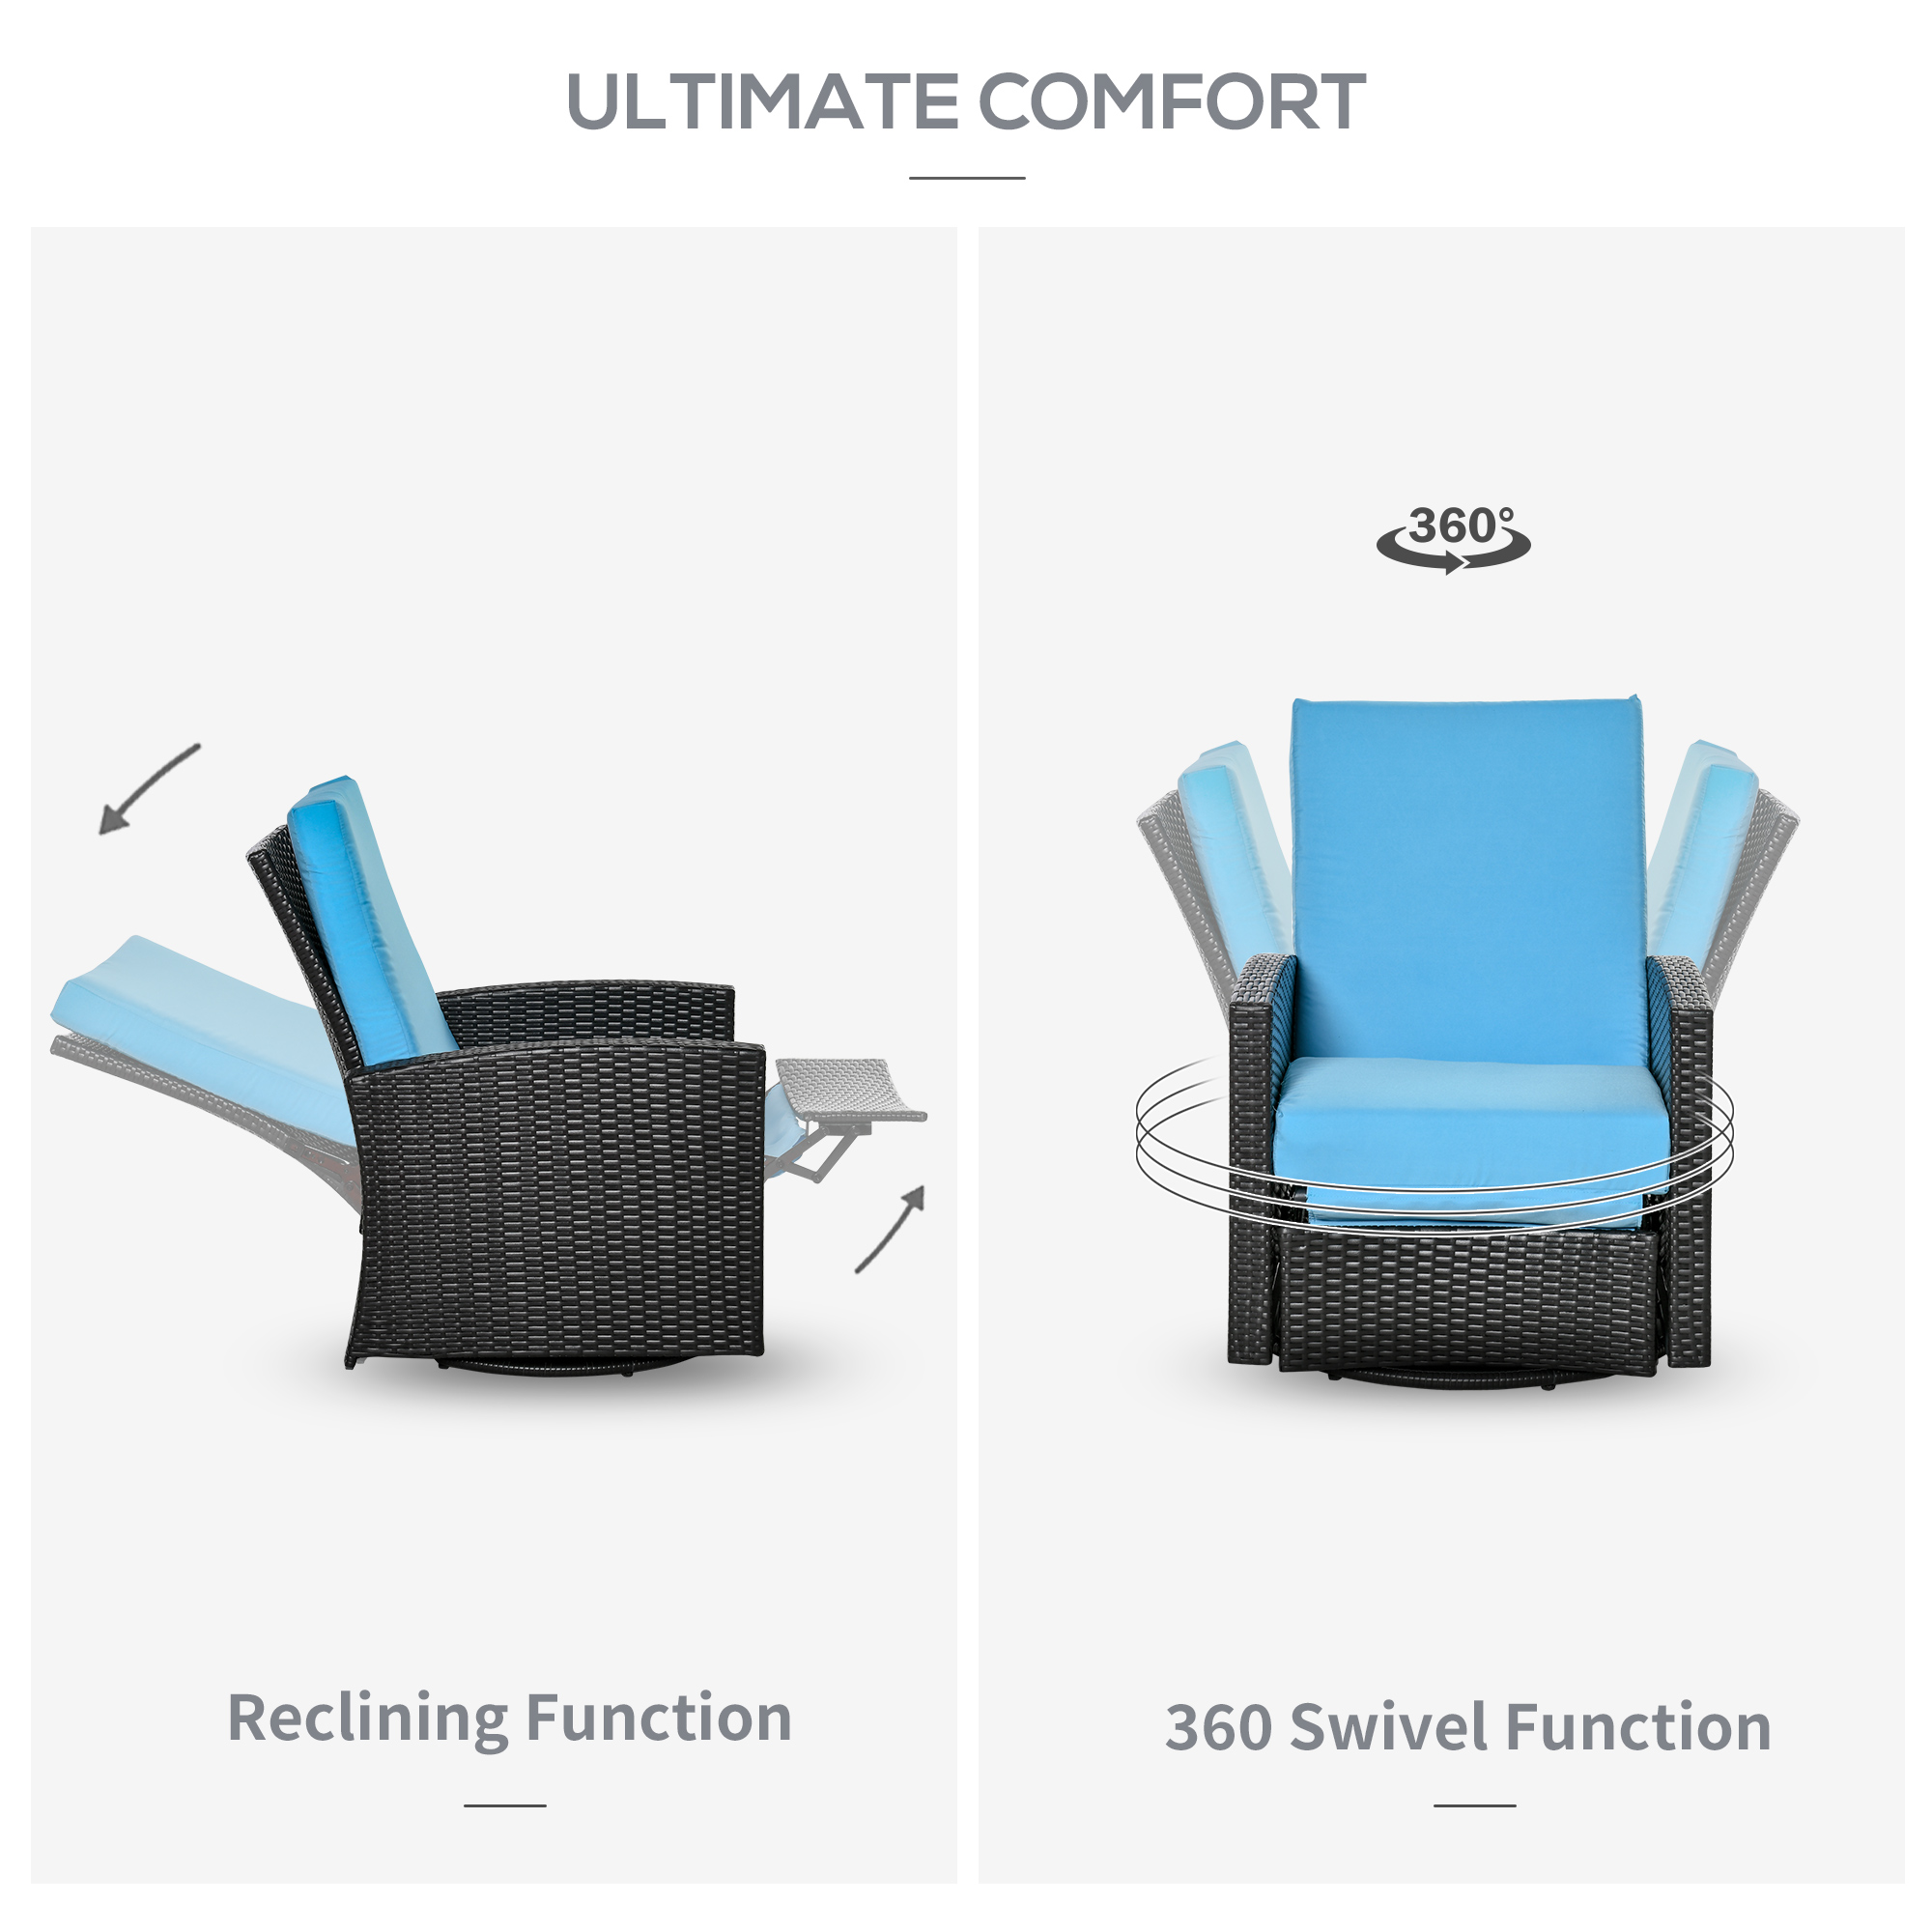 Outsunny Outdoor Wicker Swivel Recliner Chair, Reclining Backrest, Lifting Footrest, 360Â° Rotating Basic, Water Resistant Cushions for Patio, Light Blue - image 4 of 9